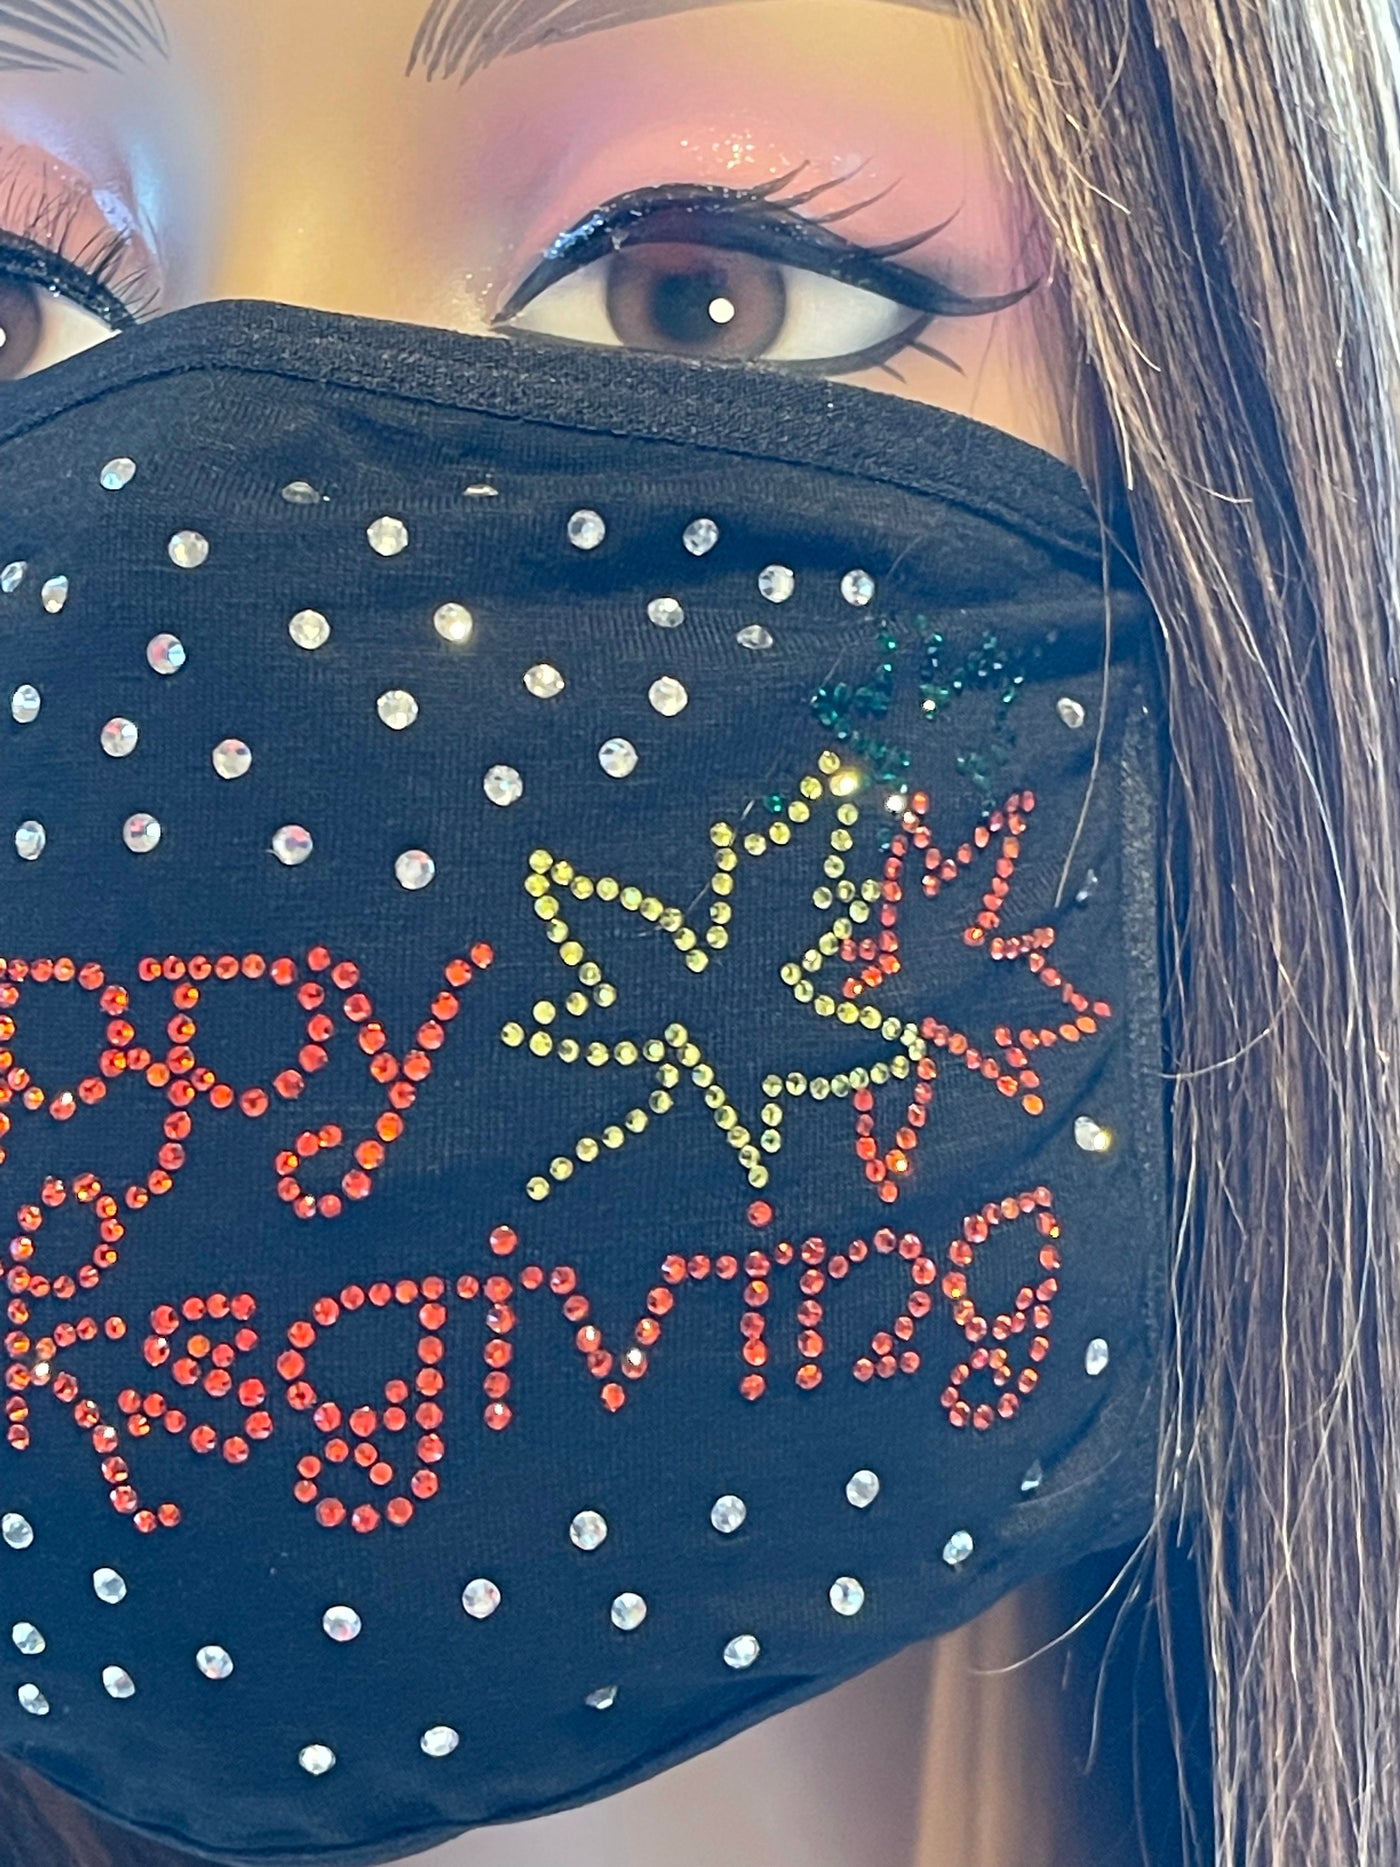 Thanksgiving Bling Rhinestone Face Mask Filter Included